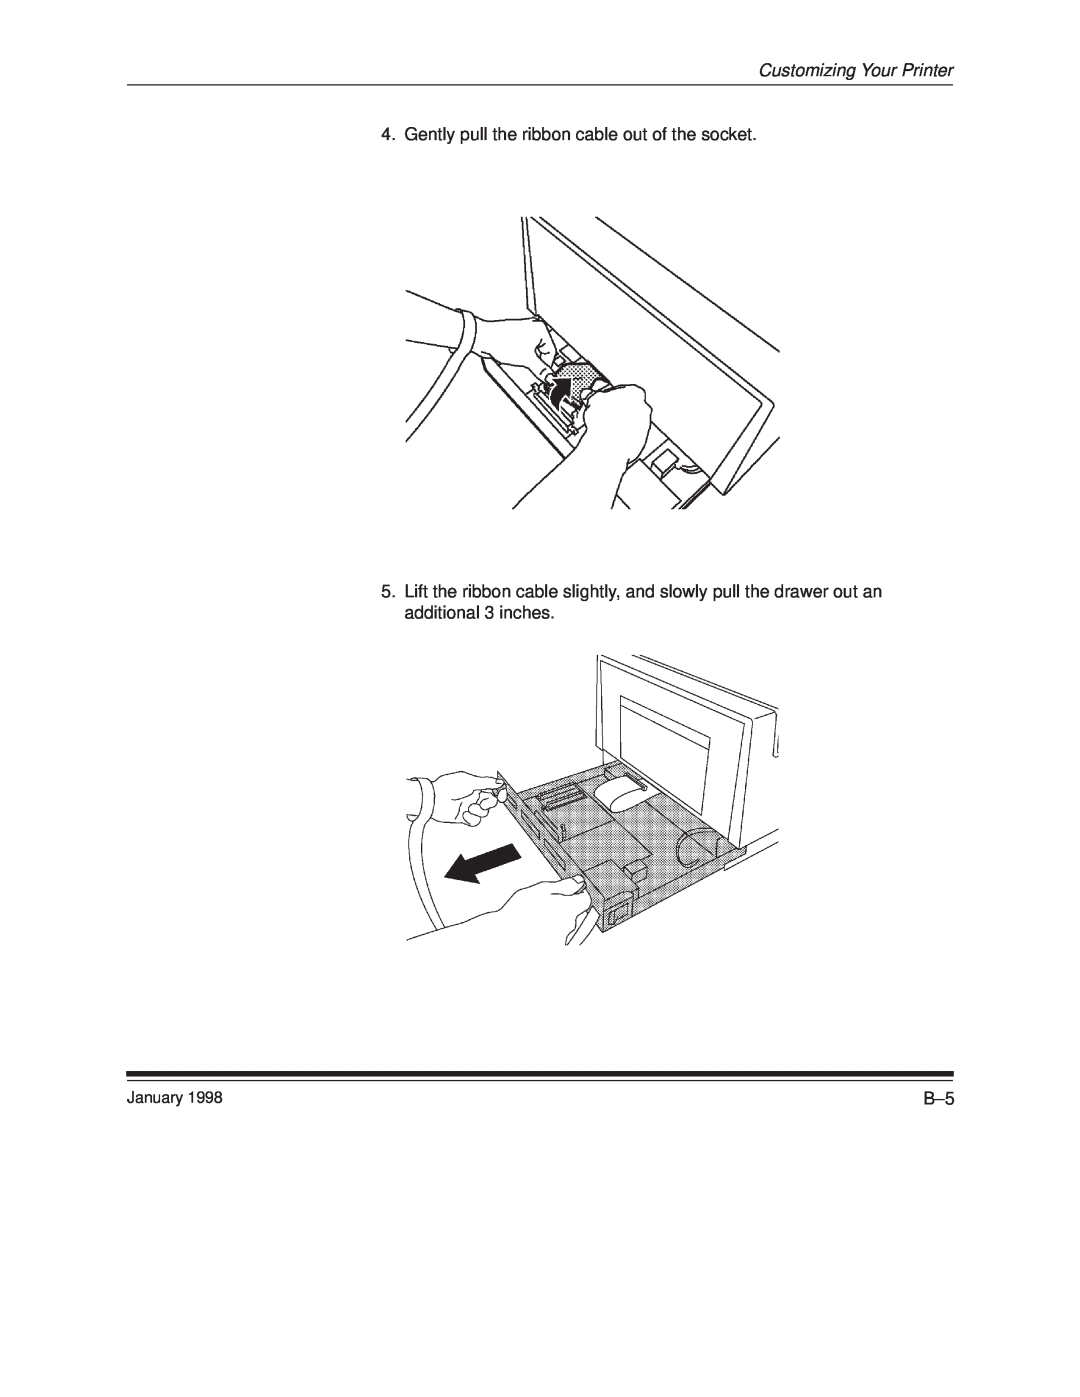 Kodak 8657 manual Customizing Your Printer, Gently pull the ribbon cable out of the socket, January 